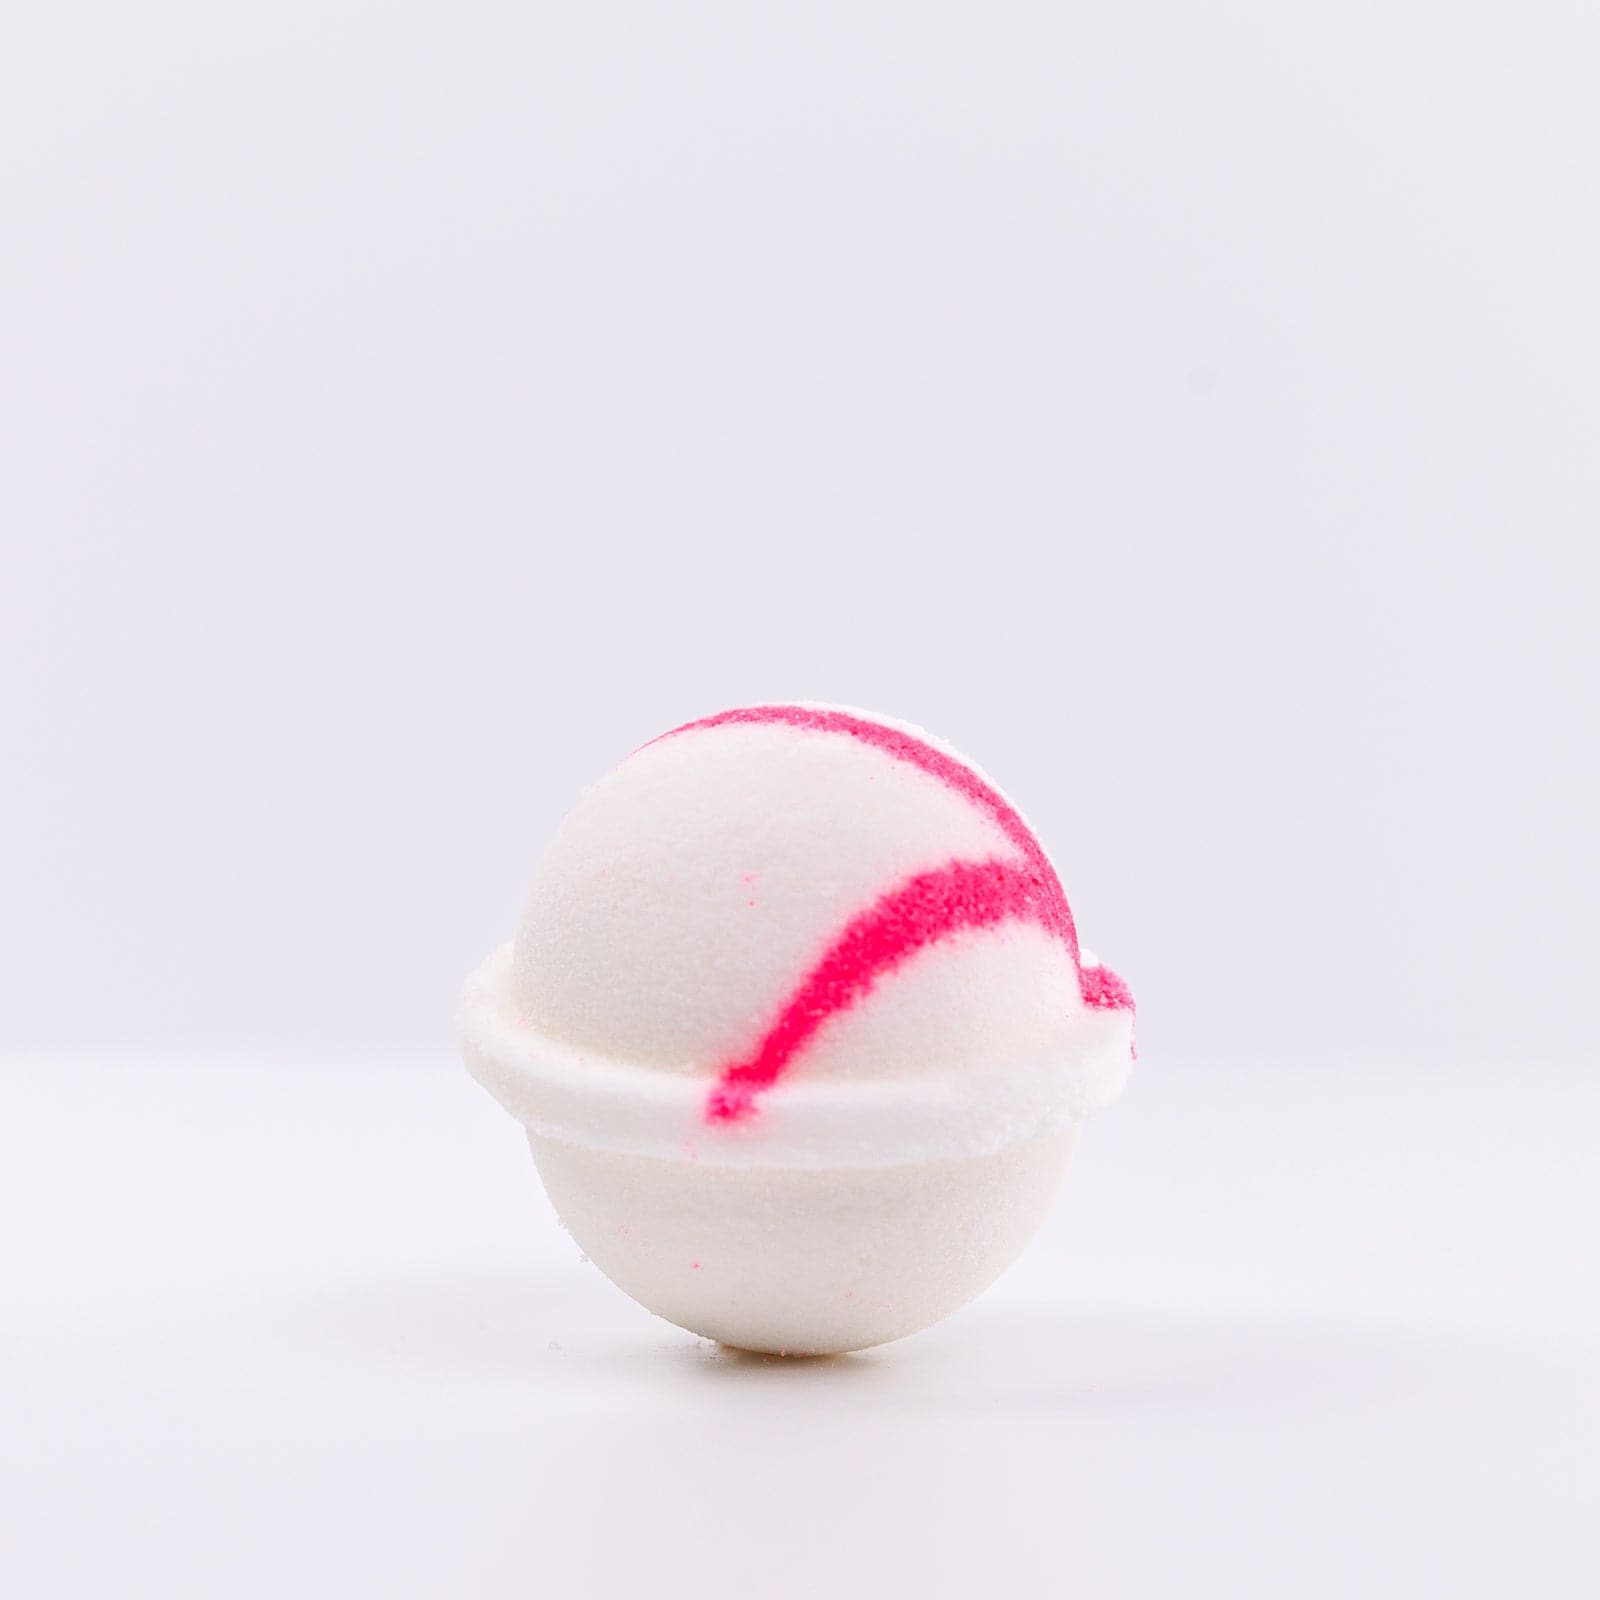 one white Mermaid Bath Bomb with pink "X" design on right side of bath bomb